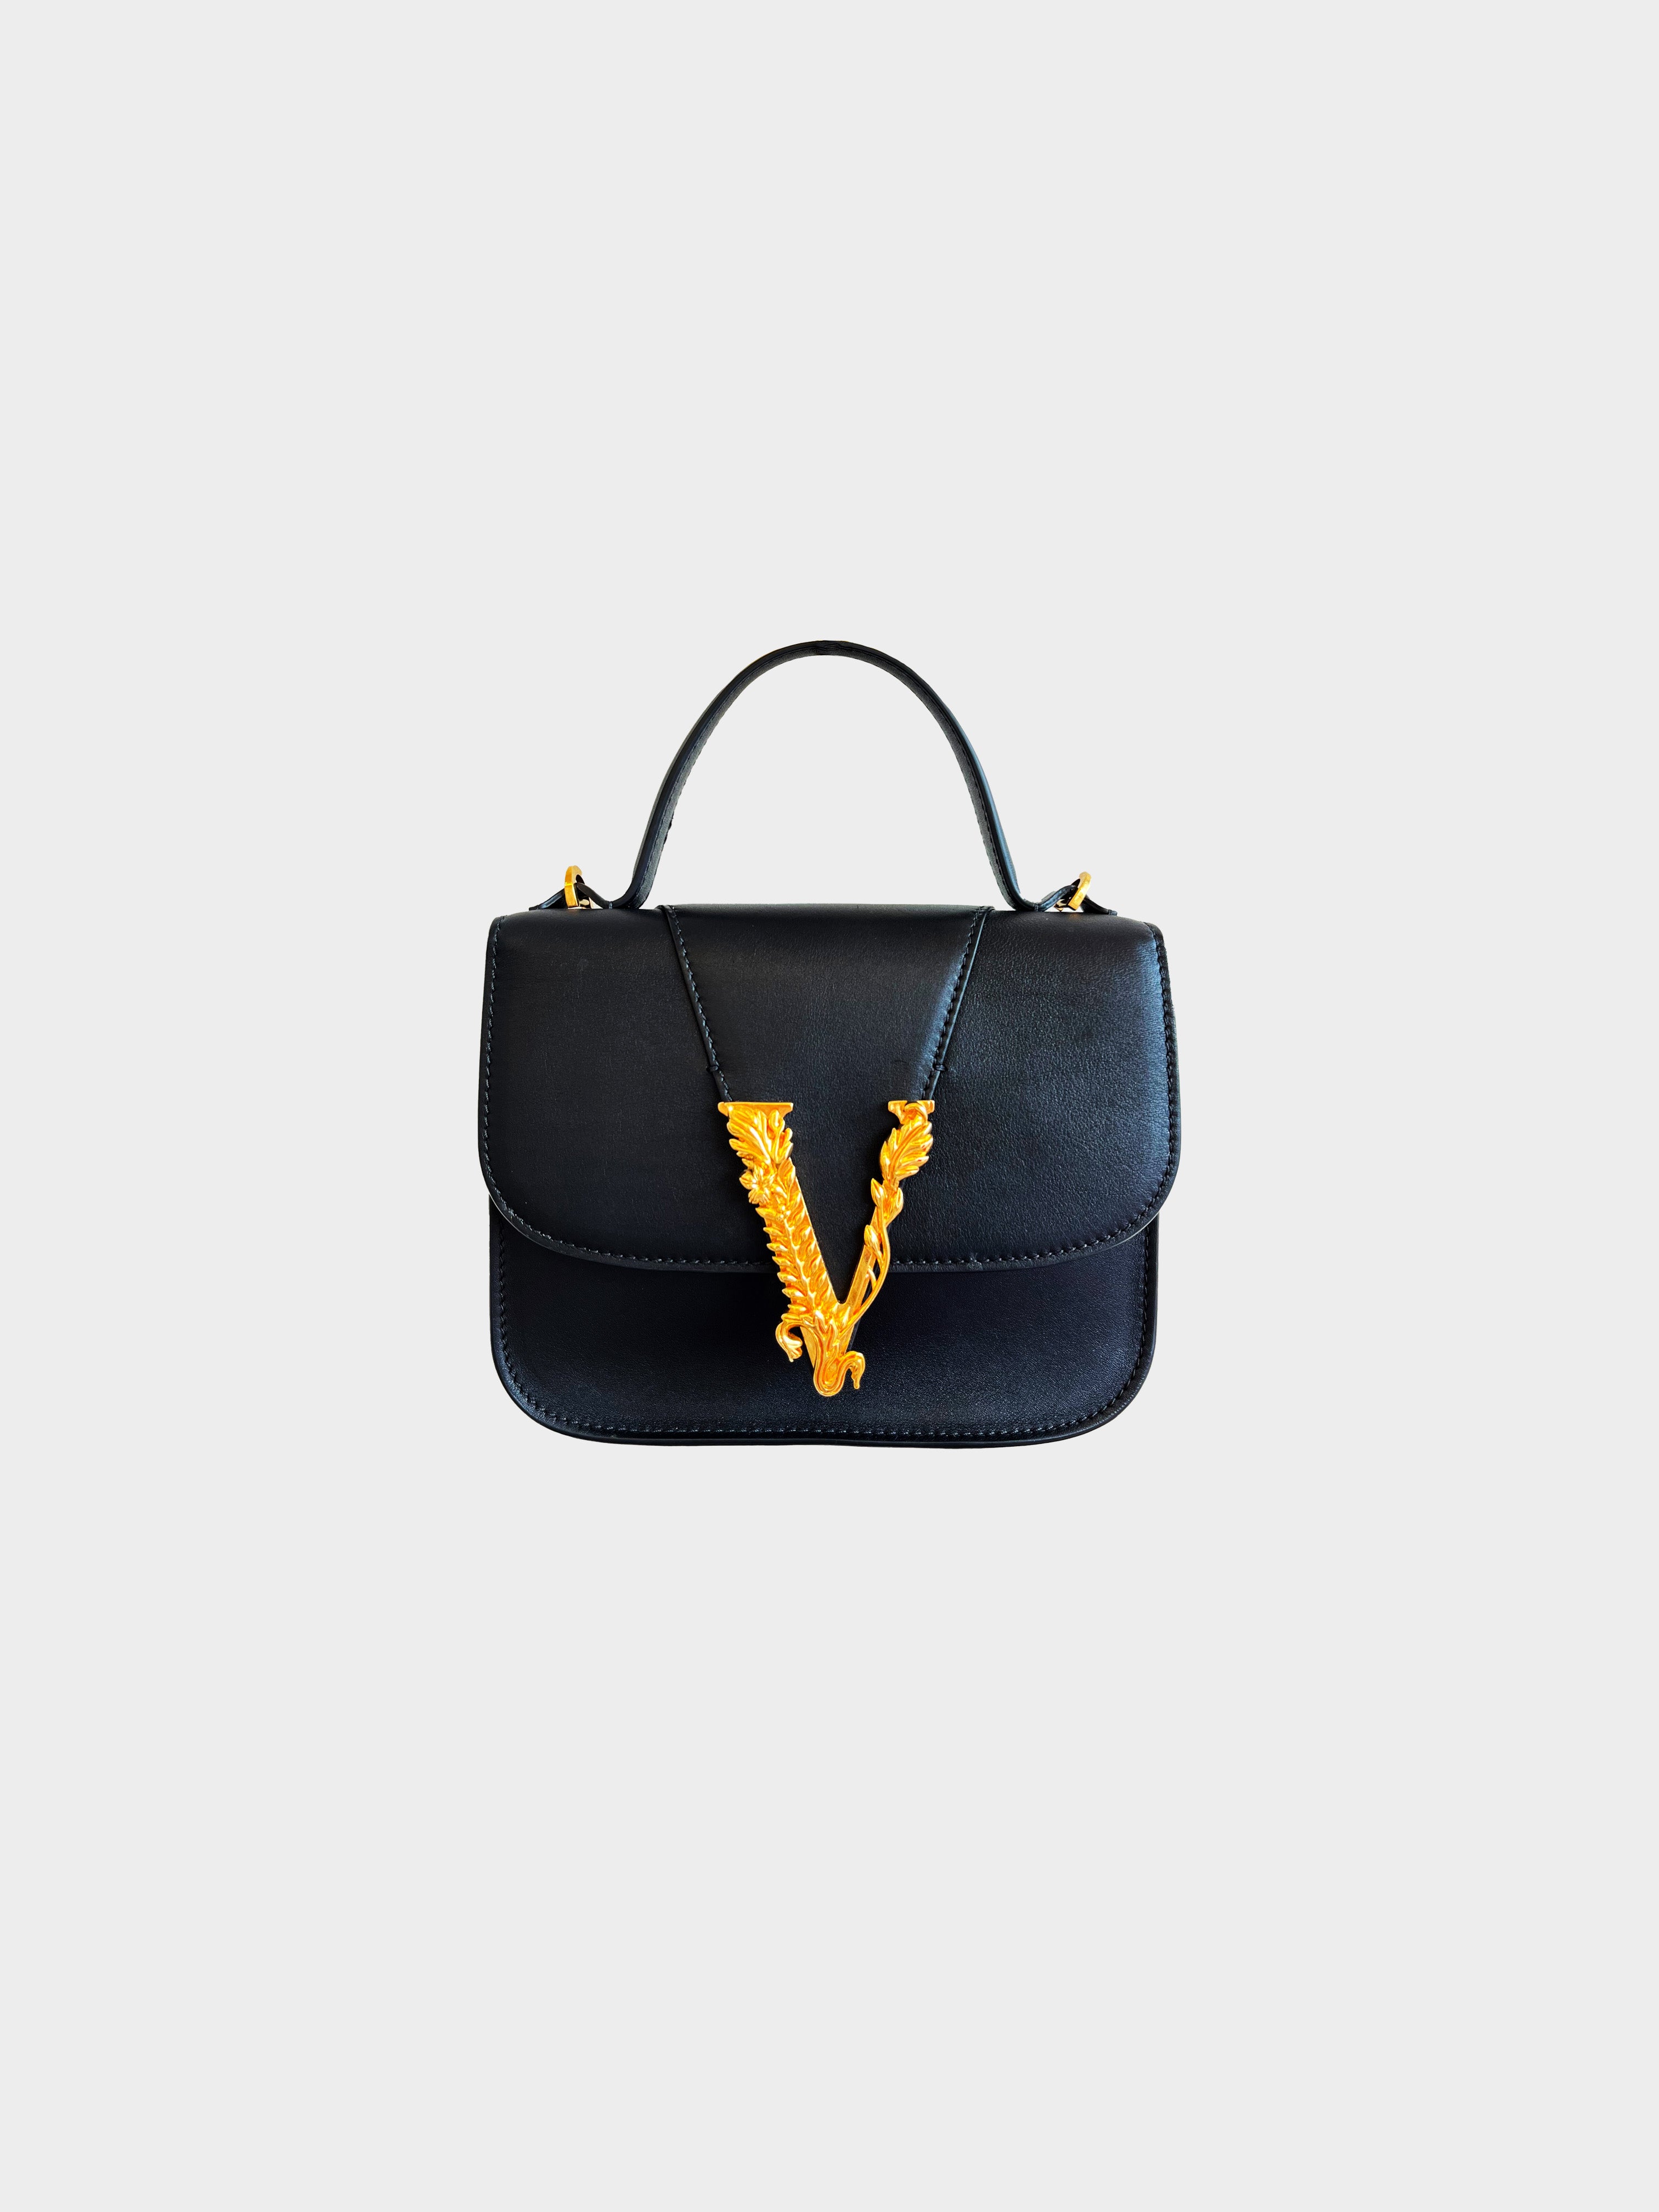 Versace Small Virtus Top Handle Bag In Leather in Black